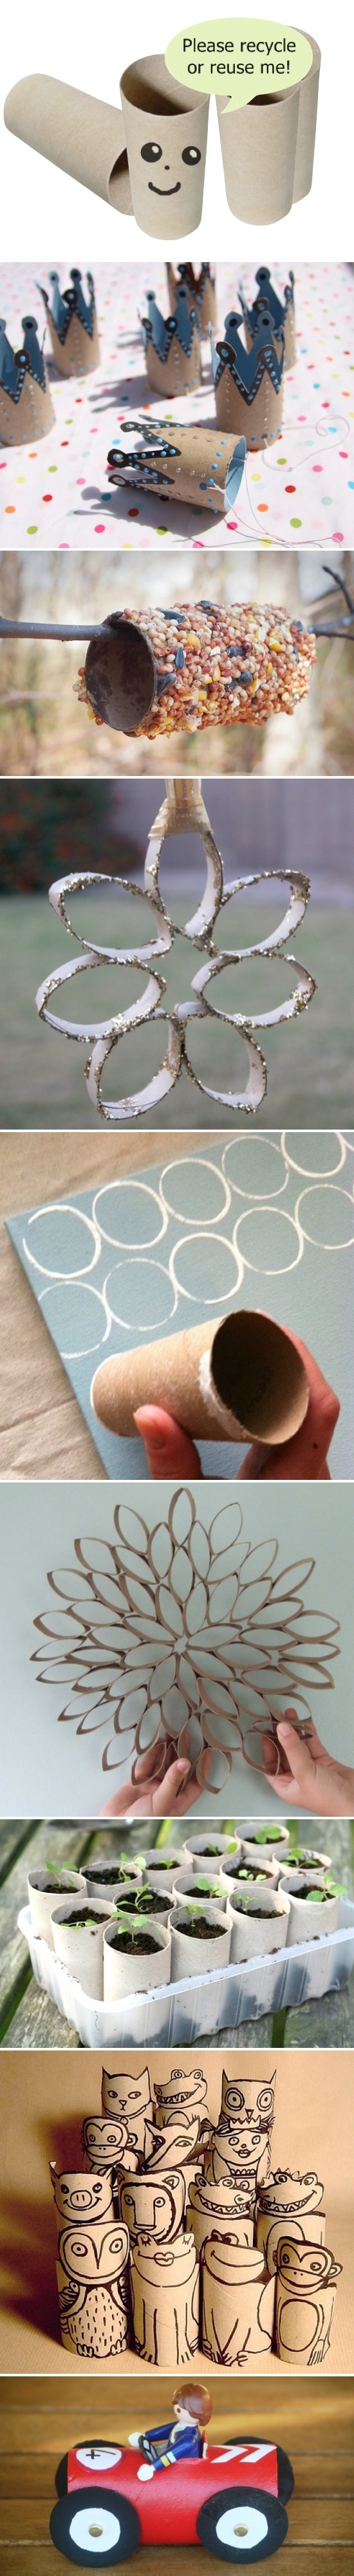 30 DIY Creative Ideas That Can Inspire You